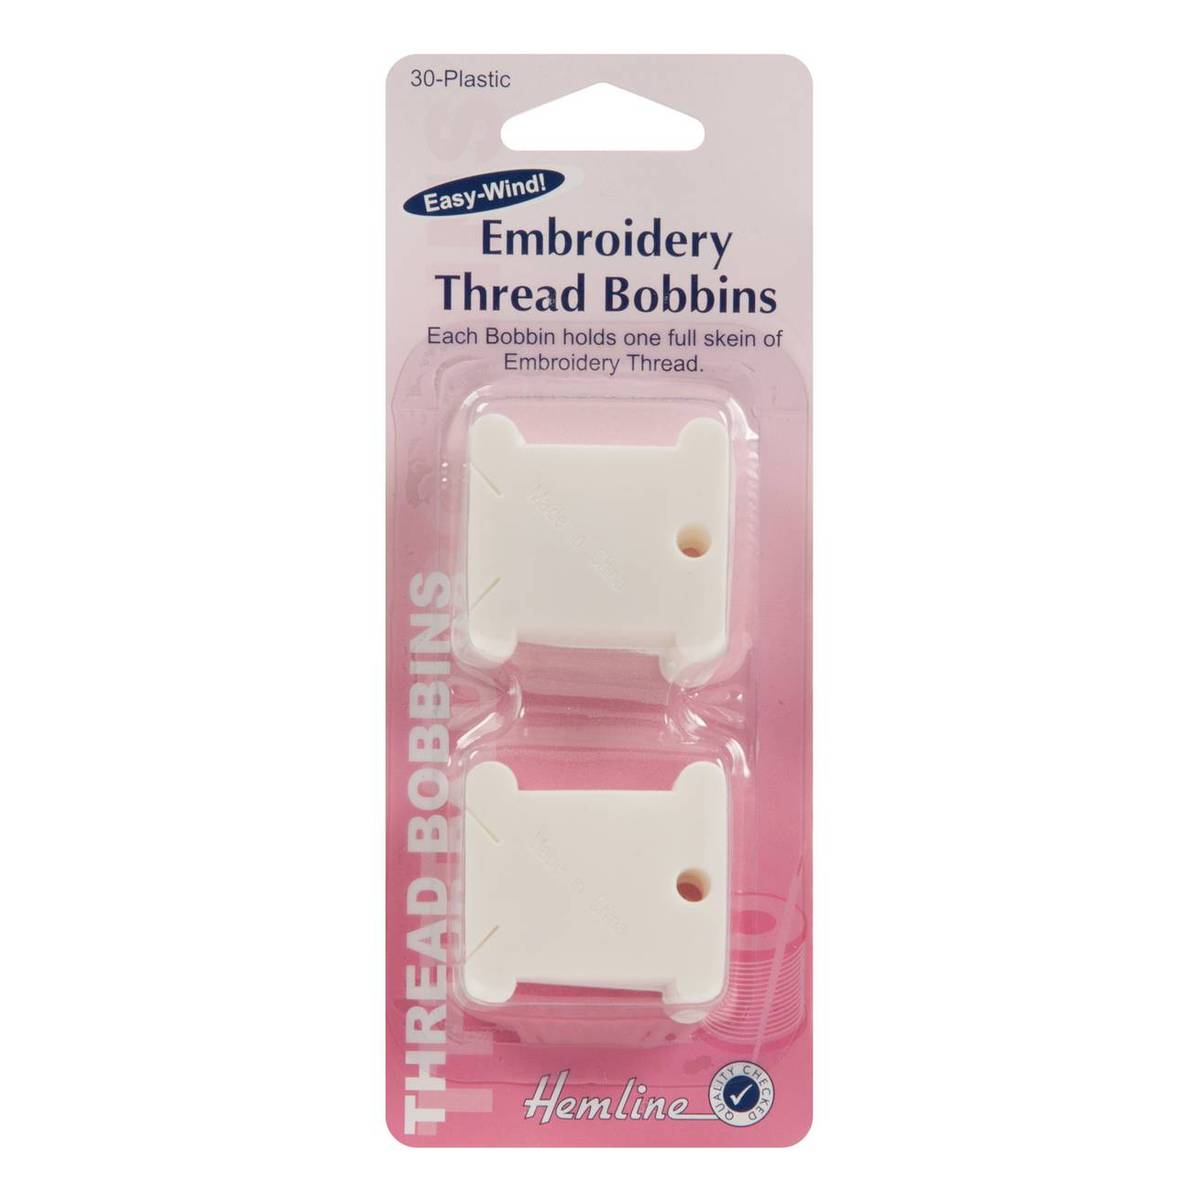 Cardboard Embroidery Thread Bobbins Floss Cards Pack of 200 